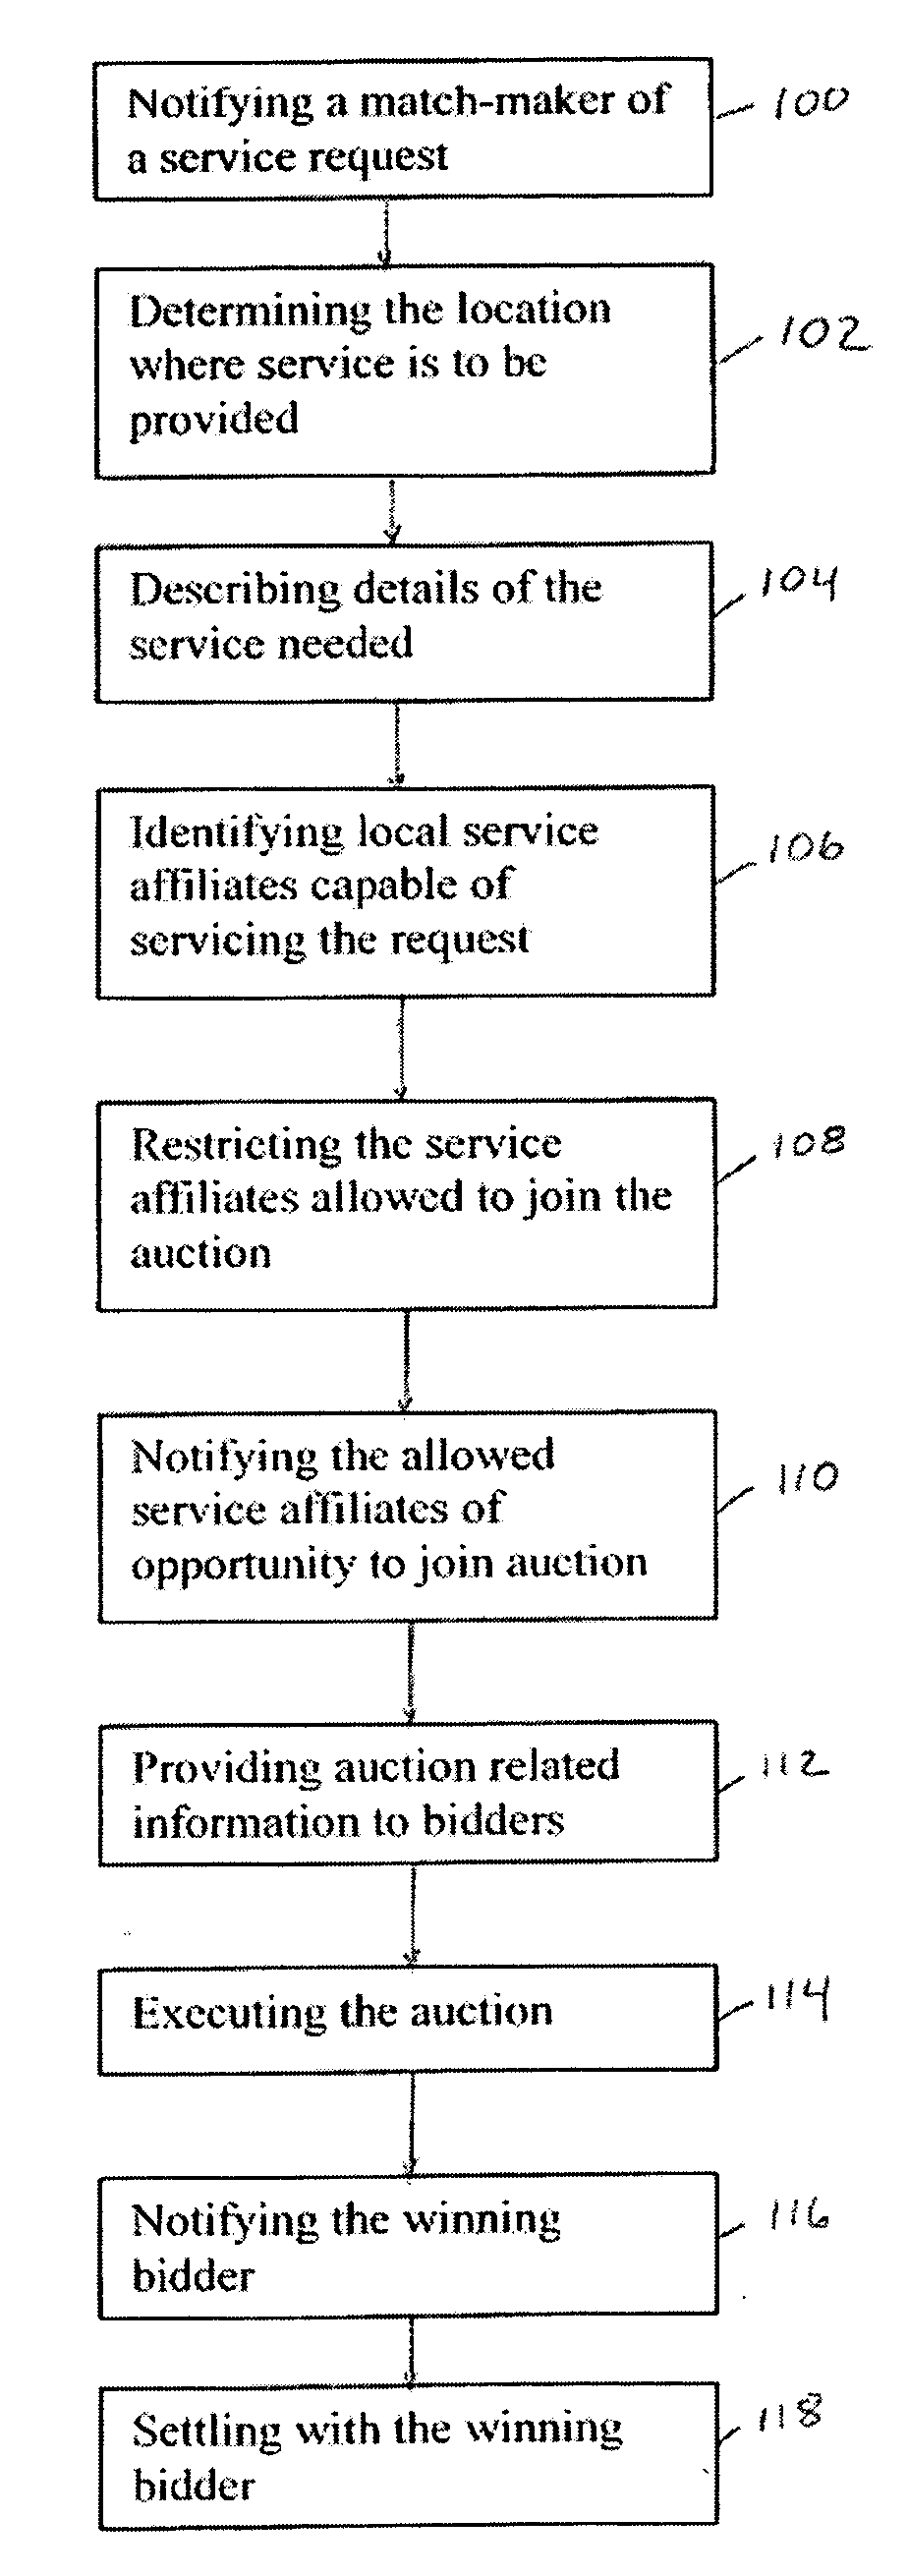 System and method for enabling service providers to create real-time reverse auctions for location based services